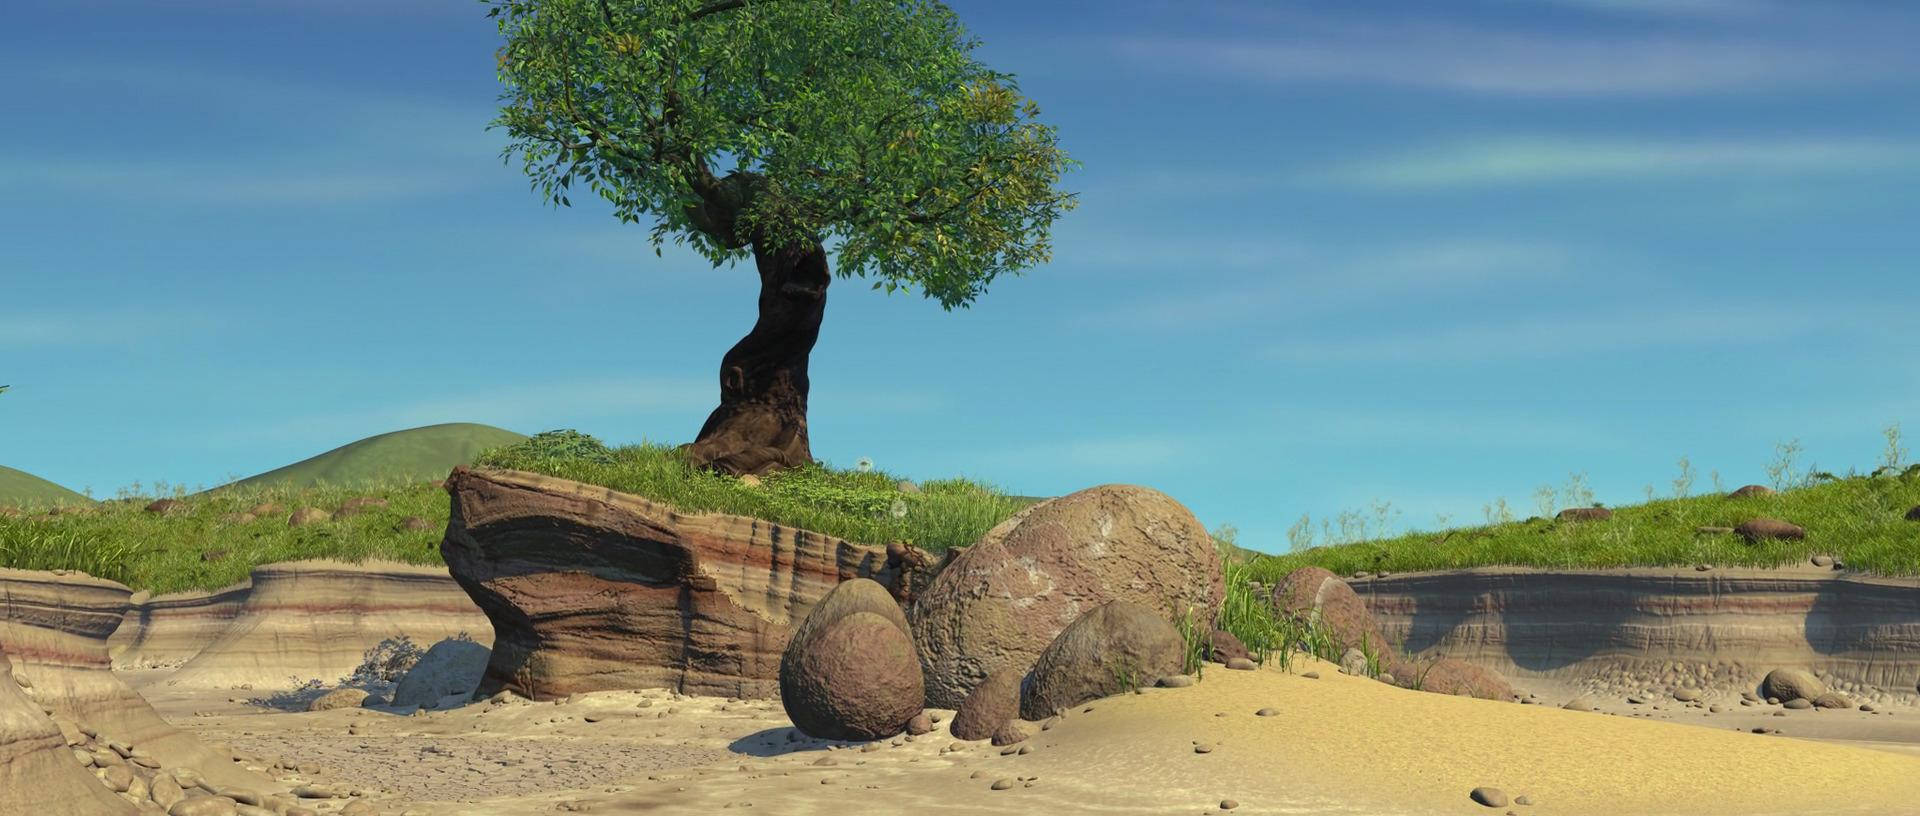 A Bug's Life Tree Background